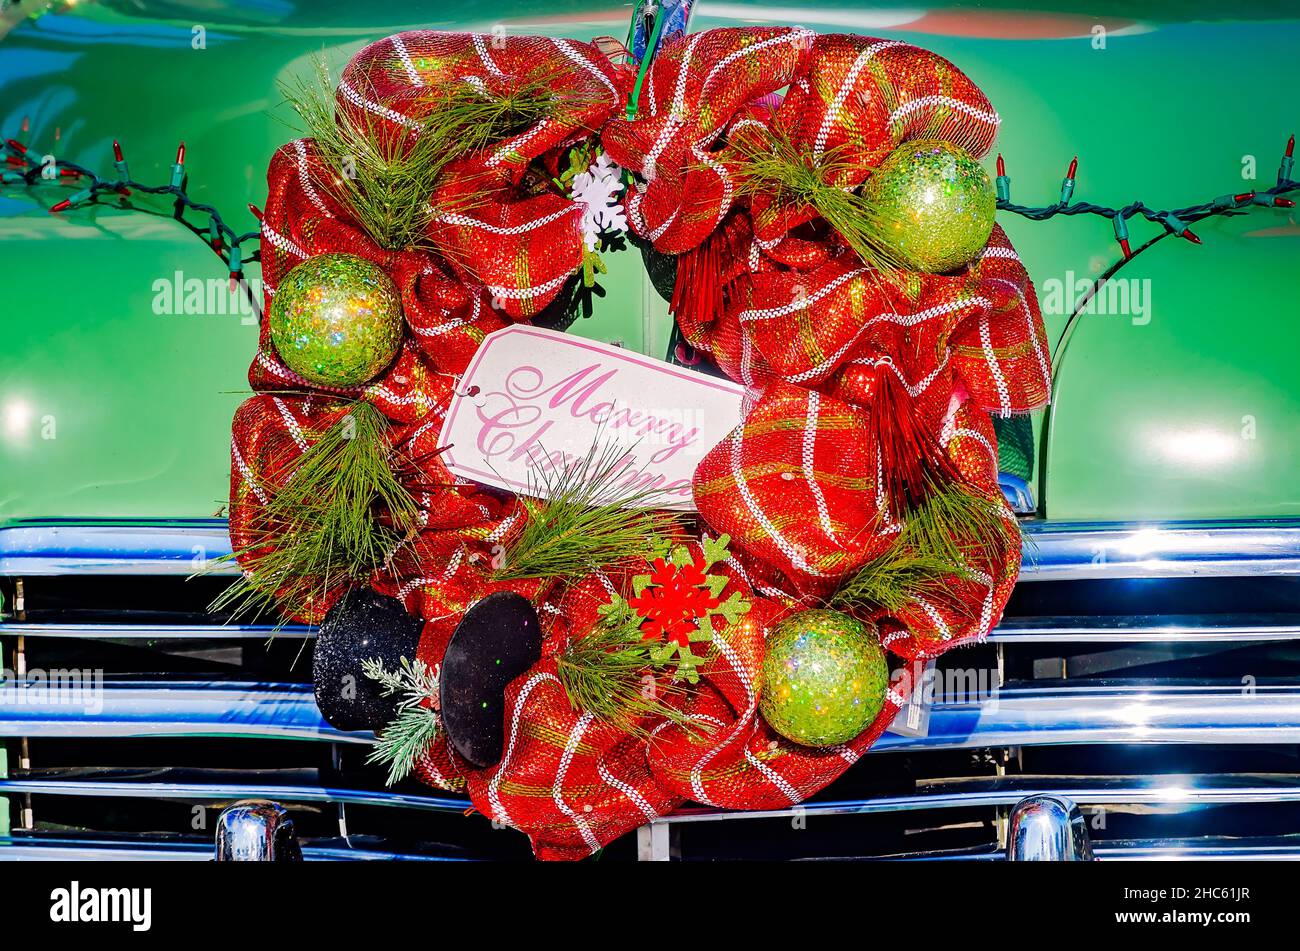 A Christmas wreath hangs on the grille of a restored 1949 Plymouth Special De Luxe automobile, Dec. 24, 2021, in Dauphin Island, Alabama. (Photo by Ca Stock Photo